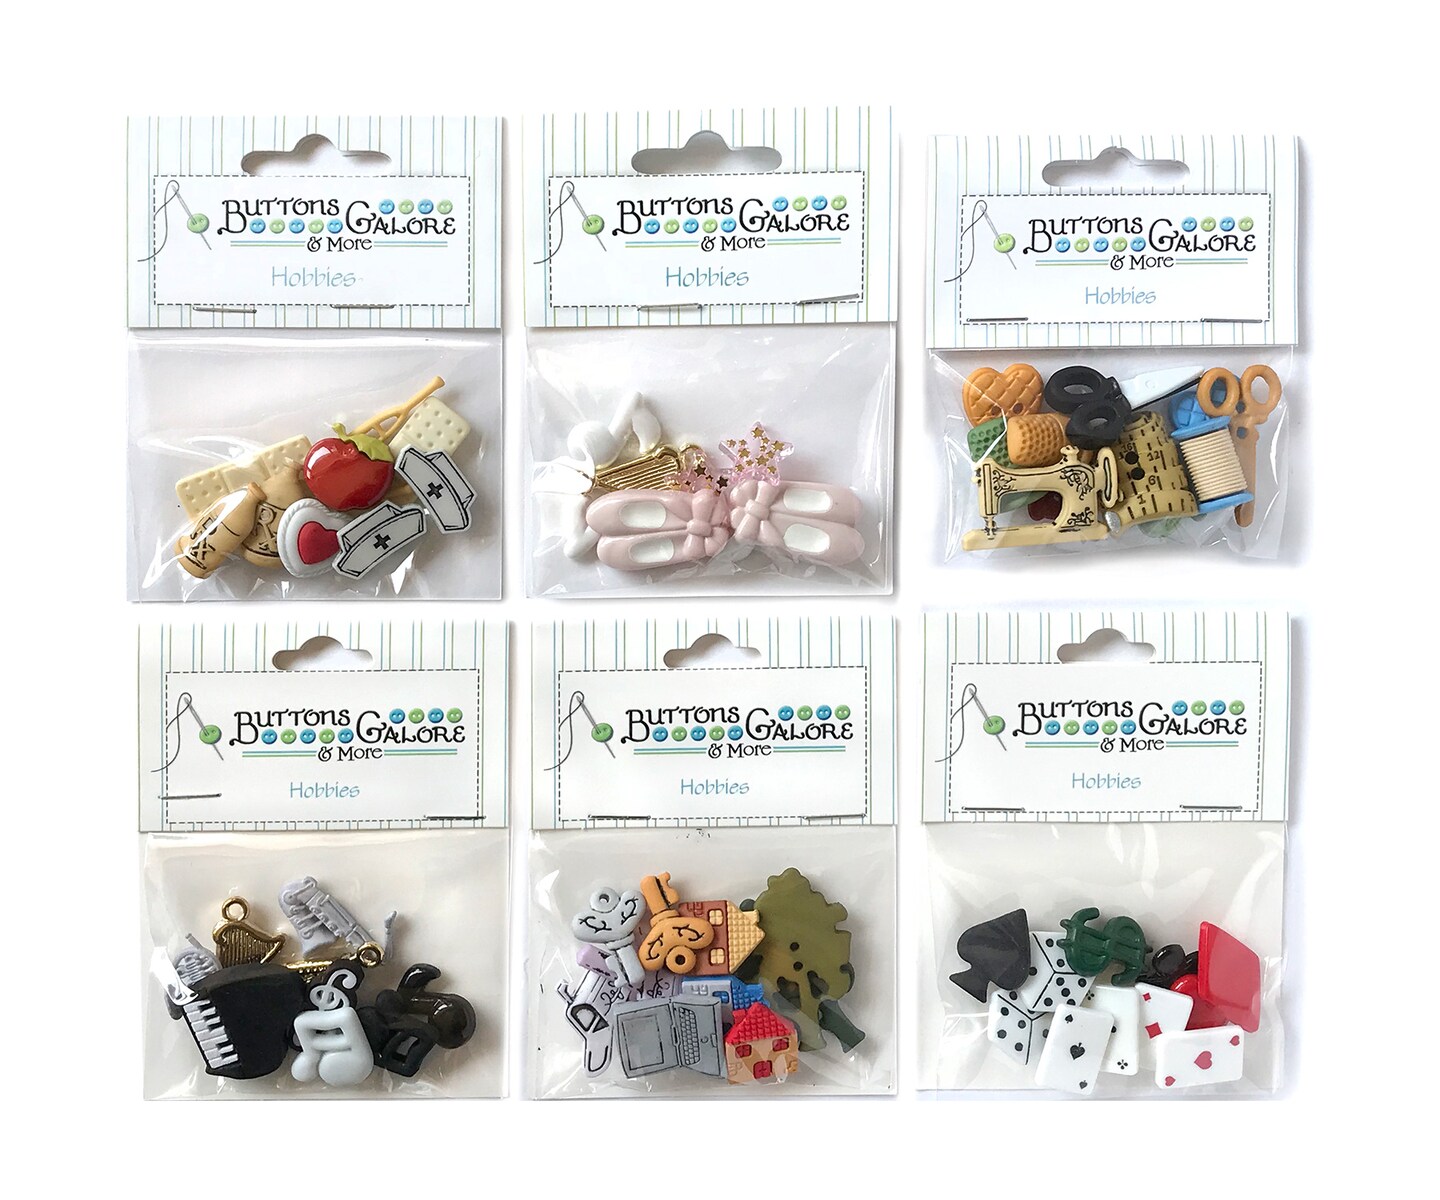 Buttons Galore 50+ Hobby Button Bundle for Sewing &#x26; Crafts - Set of 6 Button Packs